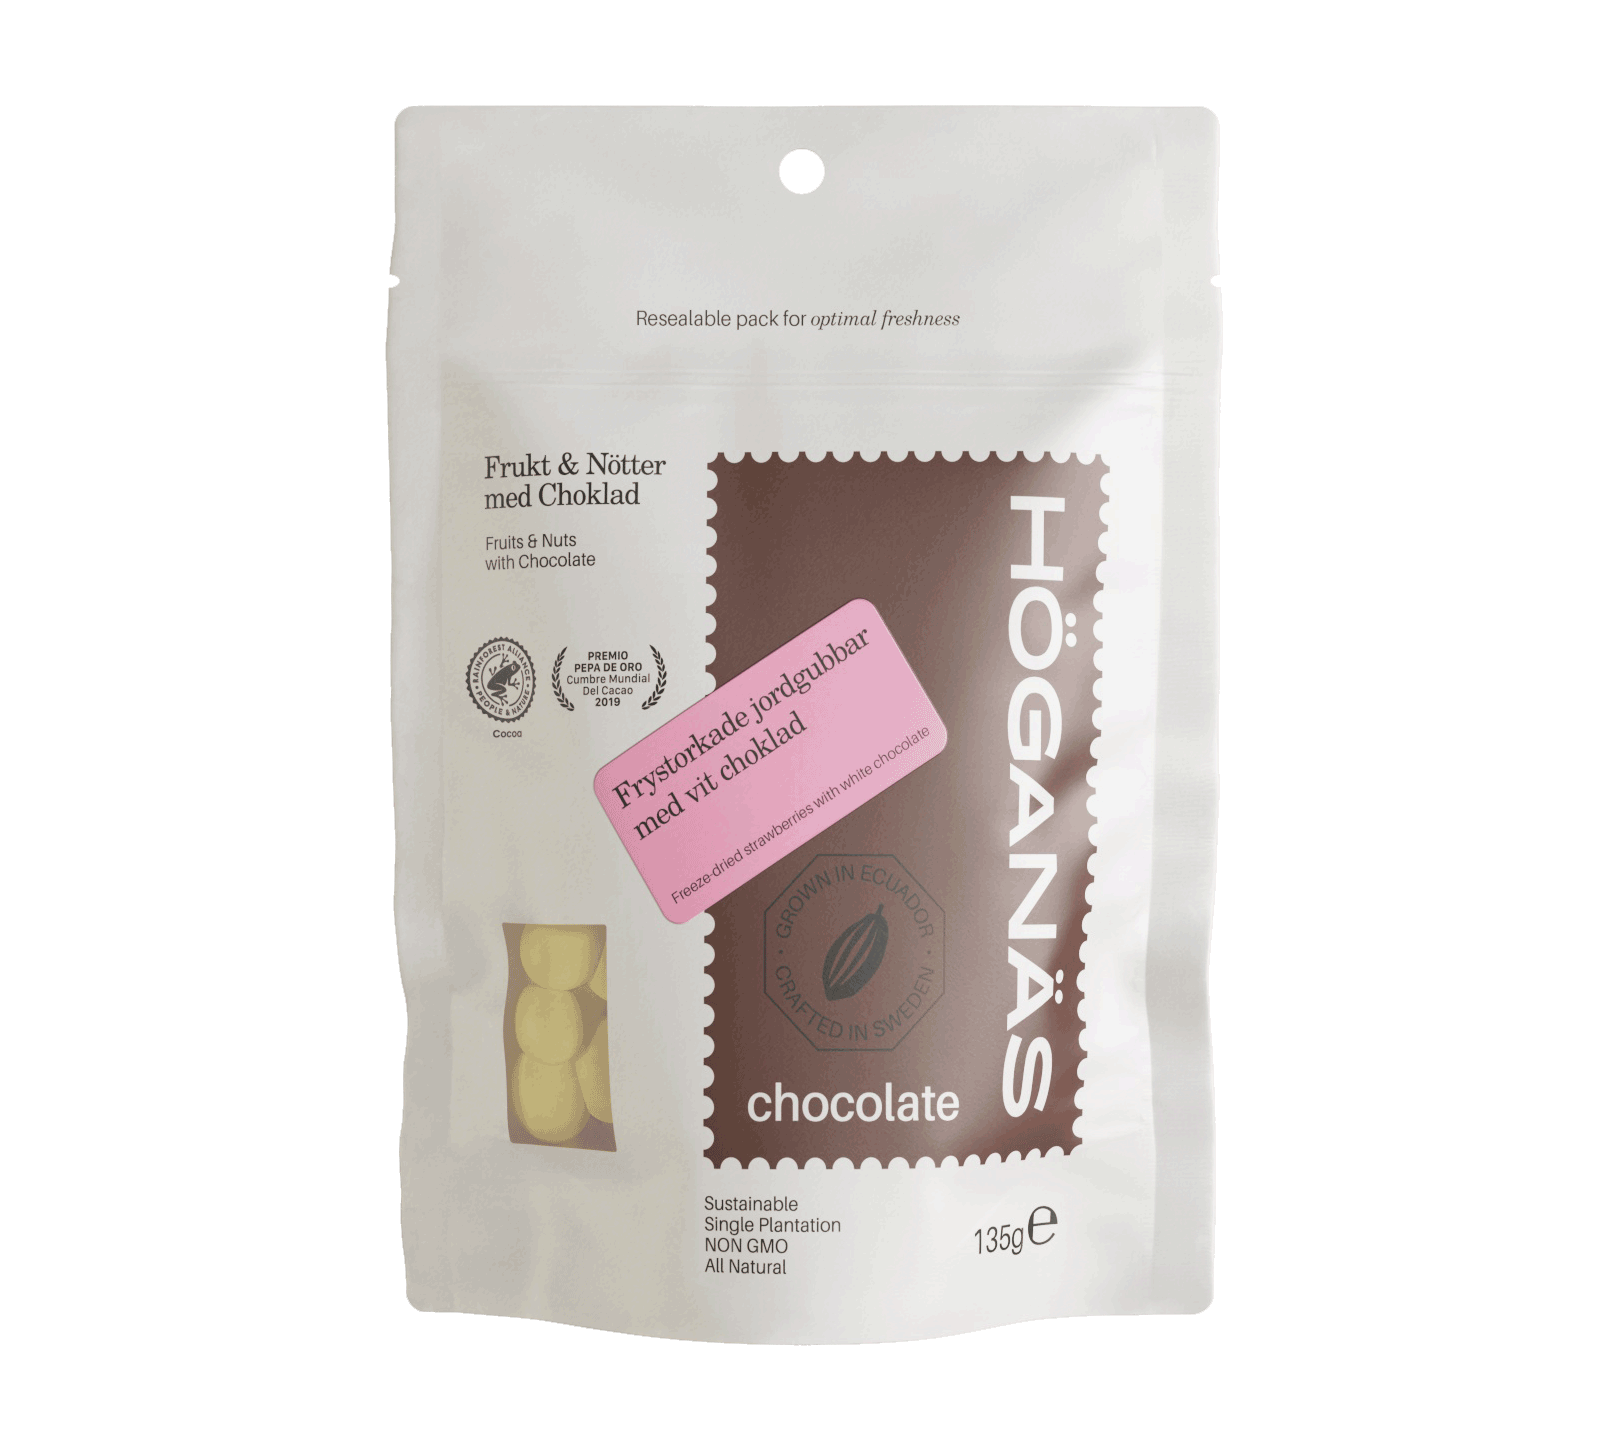 Hoganas_Chocolate_Freeze-dried_Strawberries_with_40_White_Chocolate.png